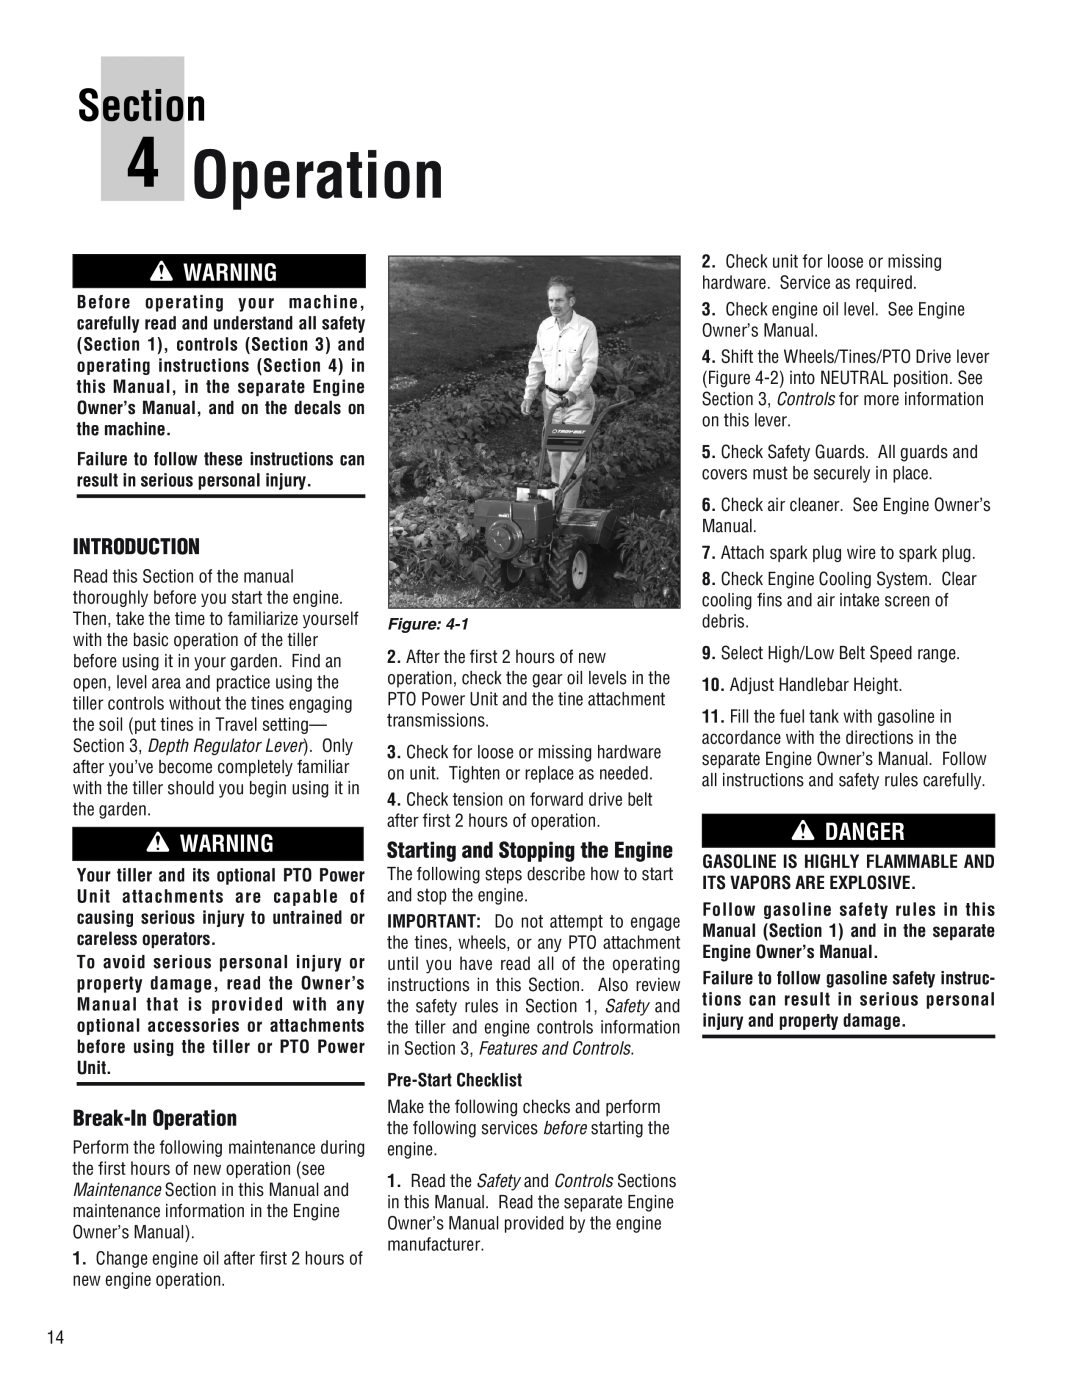 Troy-Bilt E682L, 682J Introduction, Break-In Operation, Starting and Stopping the Engine, Pre-Start Checklist, Section 